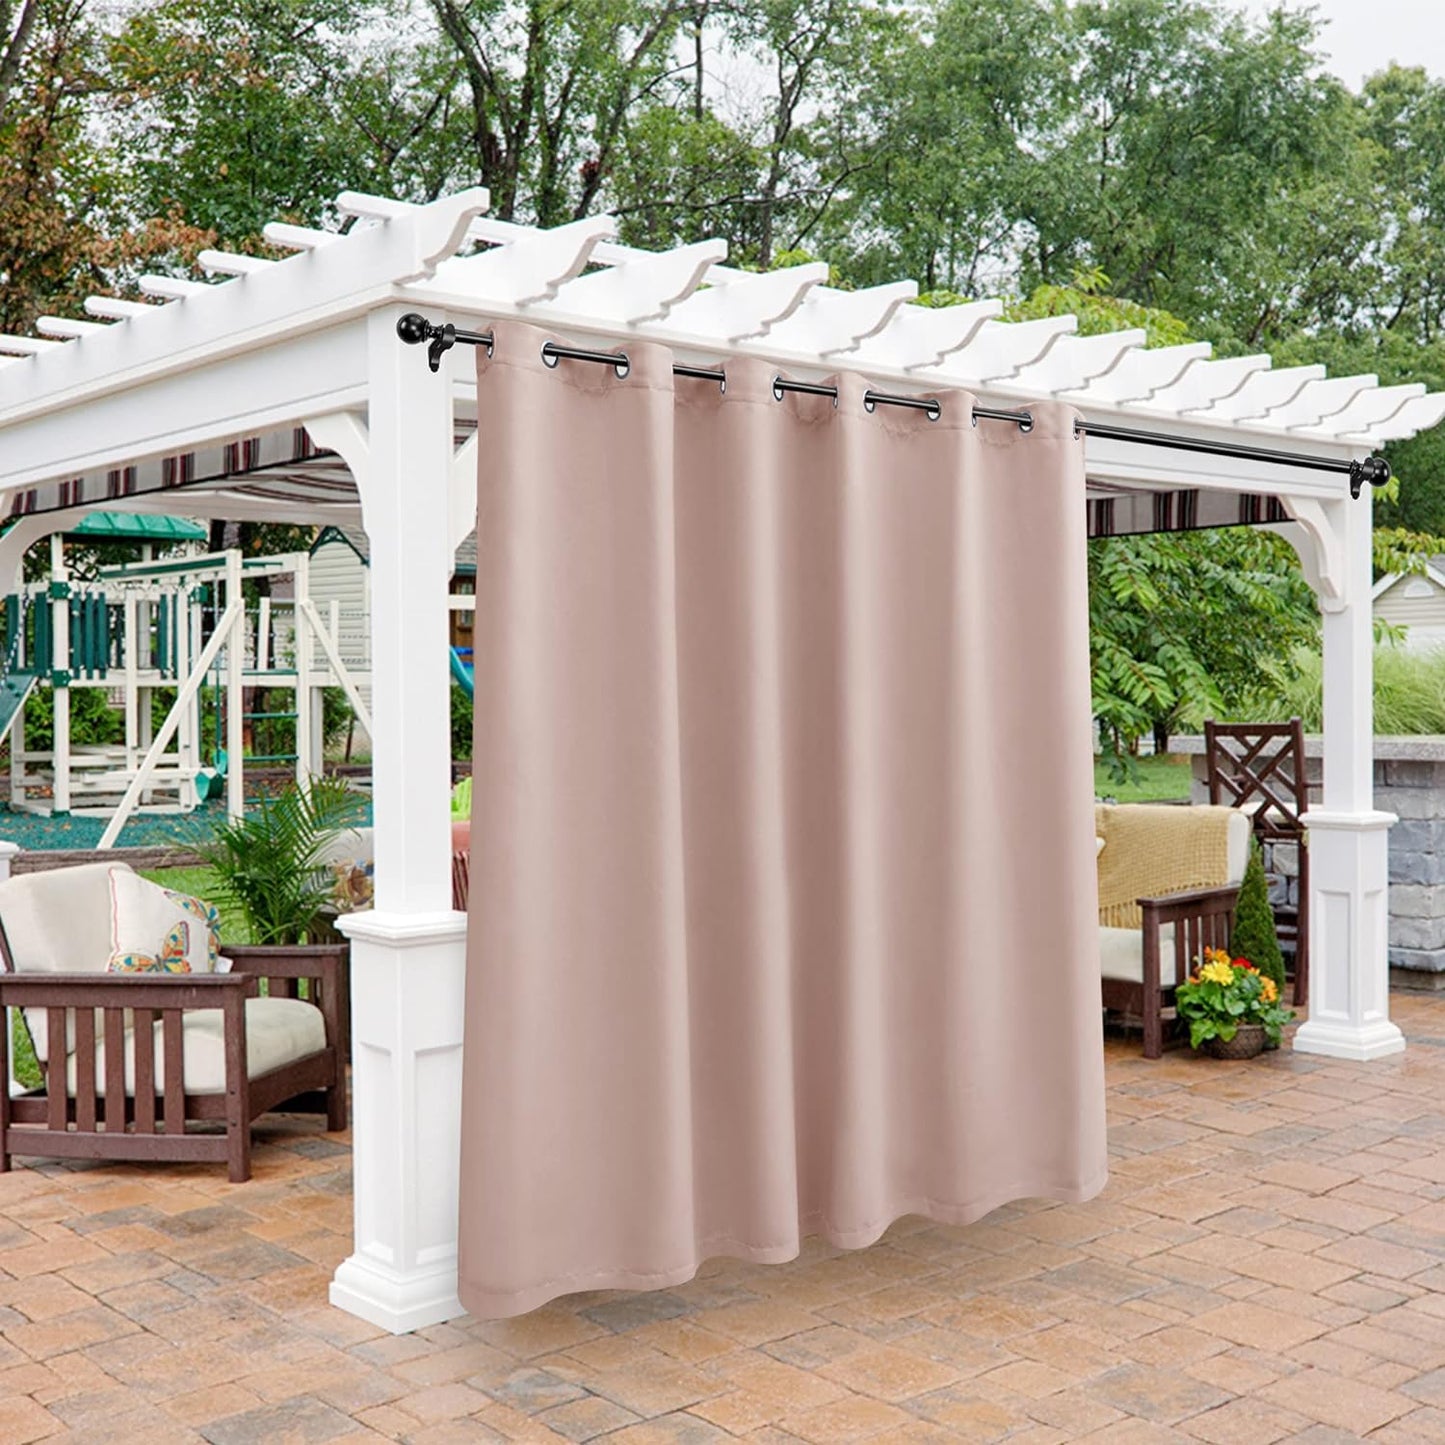 BONZER Outdoor Curtains for Patio Waterproof - Light Blocking Weather Resistant Privacy Grommet Blackout Curtains for Gazebo, Porch, Pergola, Cabana, Deck, Sunroom, 1 Panel, 52W X 84L Inch, Silver  BONZER Blush 100W X 120 Inch 